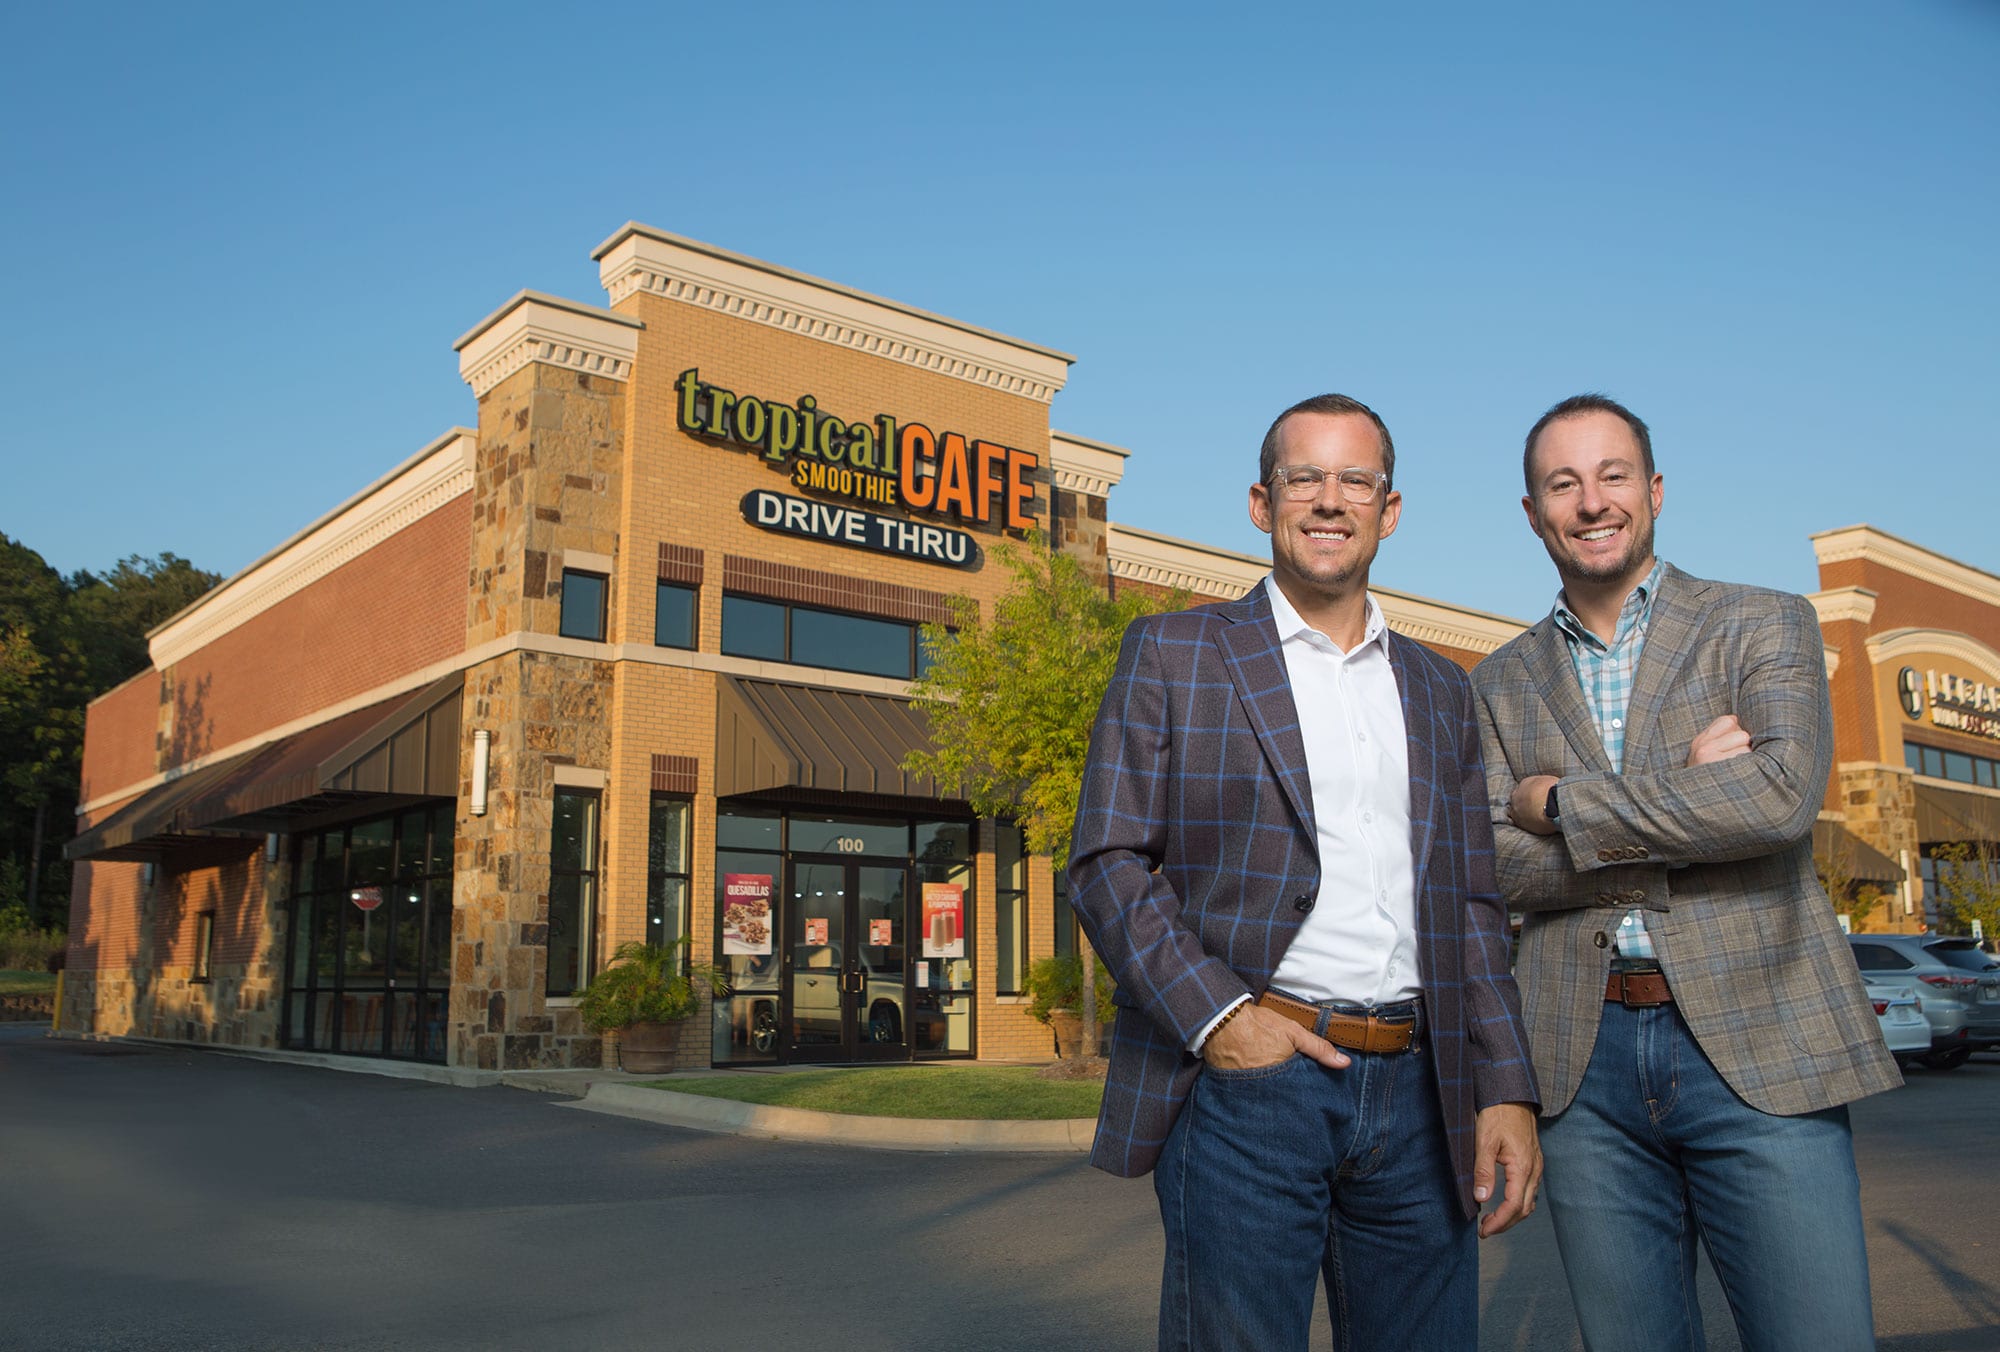 Multi-unit franchise owners Glen Johnson and Nick Crouch